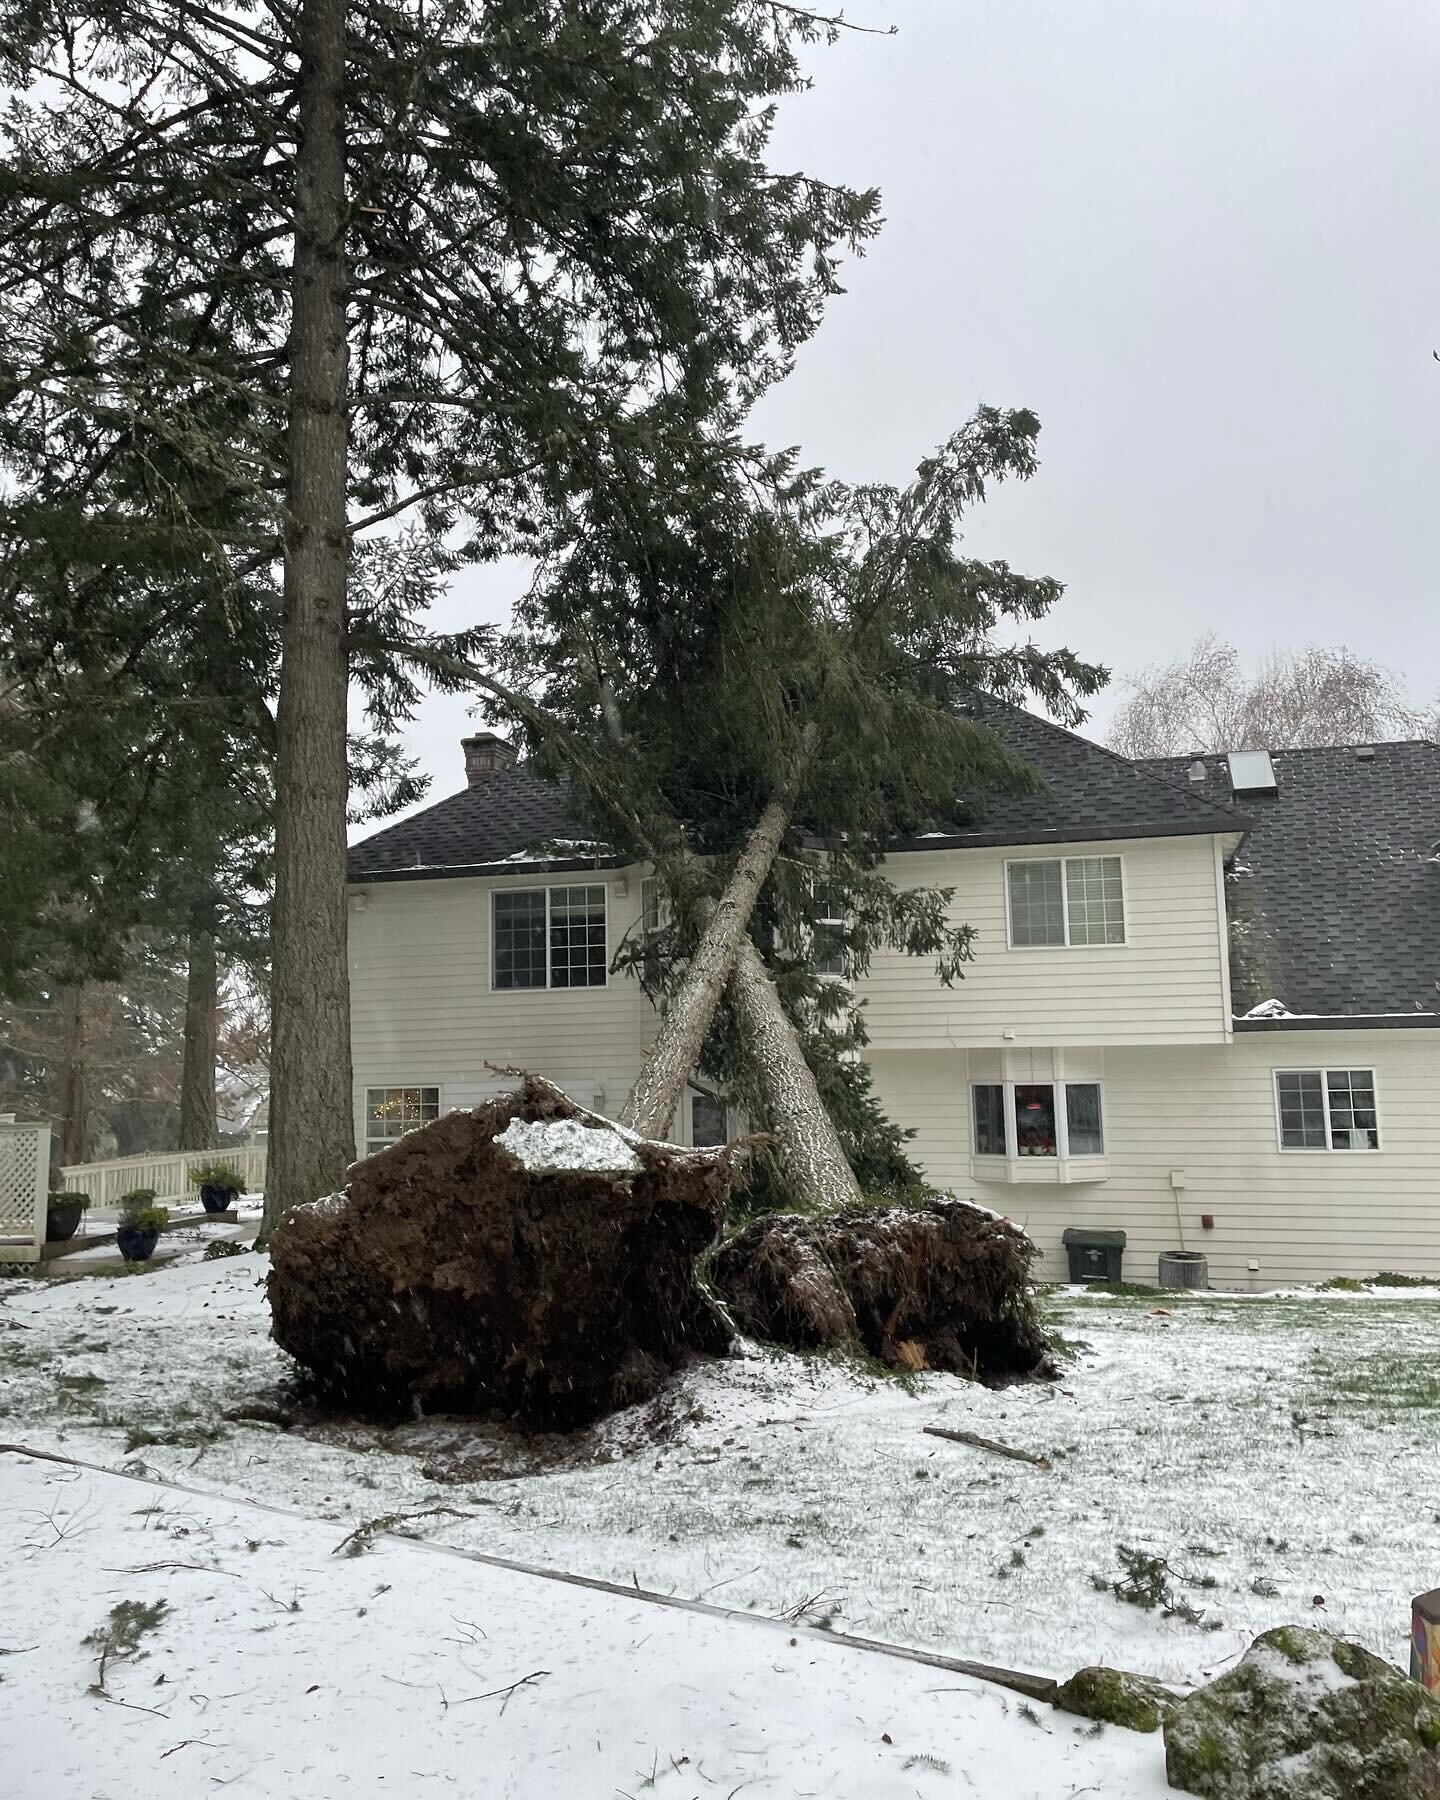 These are a few of the downed trees from the wind storm on Saturday, 1/13/24, in BEAVERTON. If you need a bid for tree removal, give us a call! We are doing emergency bids on a first come first serve basis as well and scheduling the work. 
Contact in